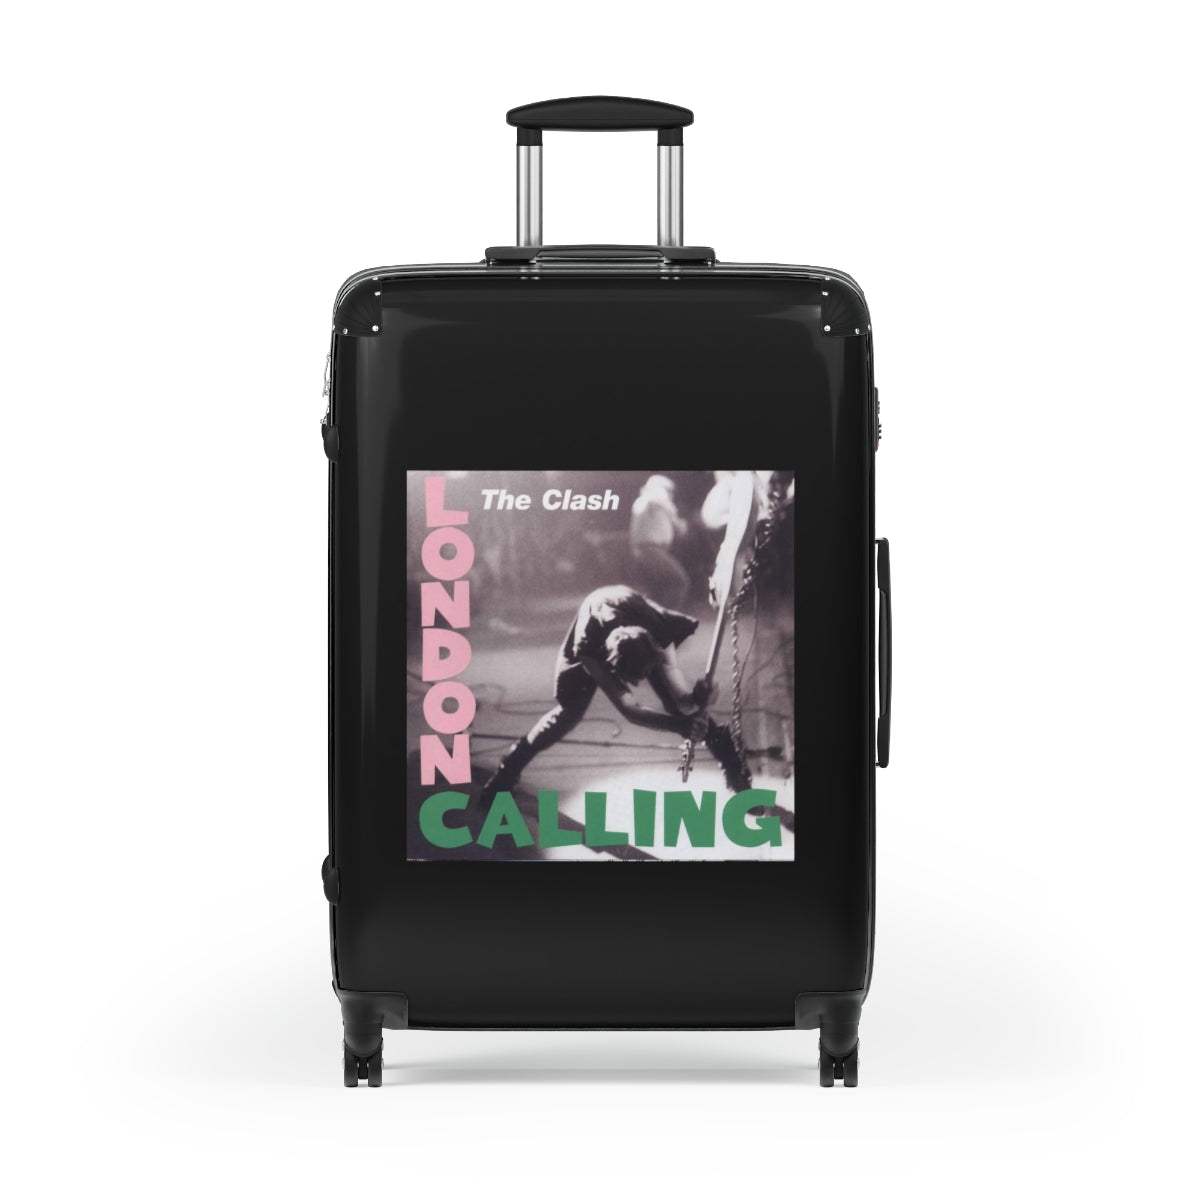 Getrott The Clash London Calling 1979 Black Cabin Suitcase Extended Storage Adjustable Telescopic Handle Double wheeled Polycarbonate Hard-shell Built-in Lock-Bags-Geotrott